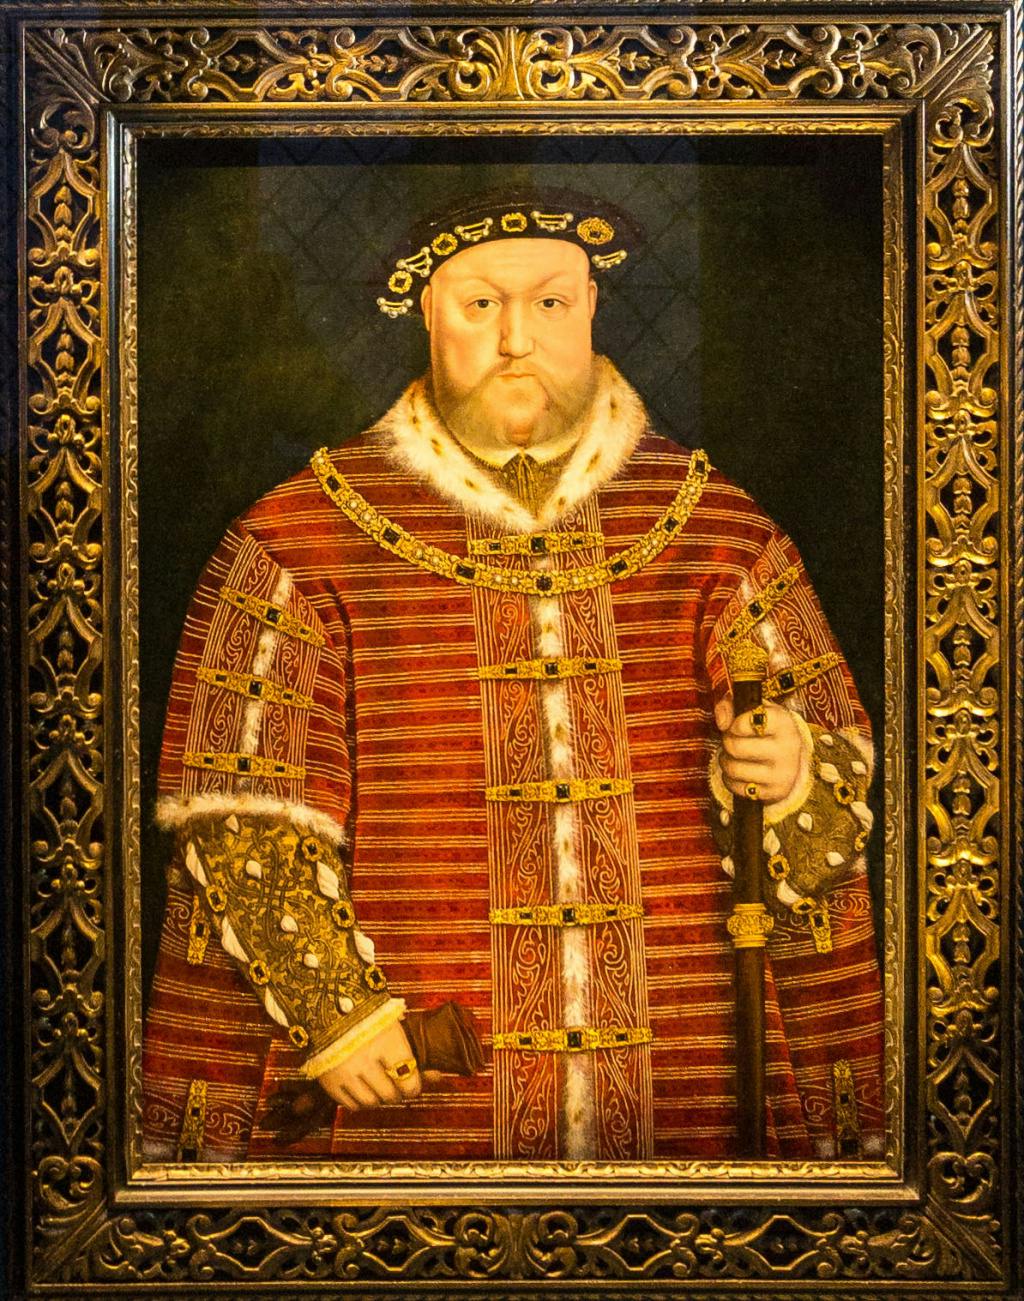 Henry VIII portrait at Hampton Court Palace, showing the King facing the viewer, wearing a deep red gown, lined with fur and decorated with jewels. He holds in his left hand a wooden staff in his hand adorned with gold, and in his left hand he holds a glove.